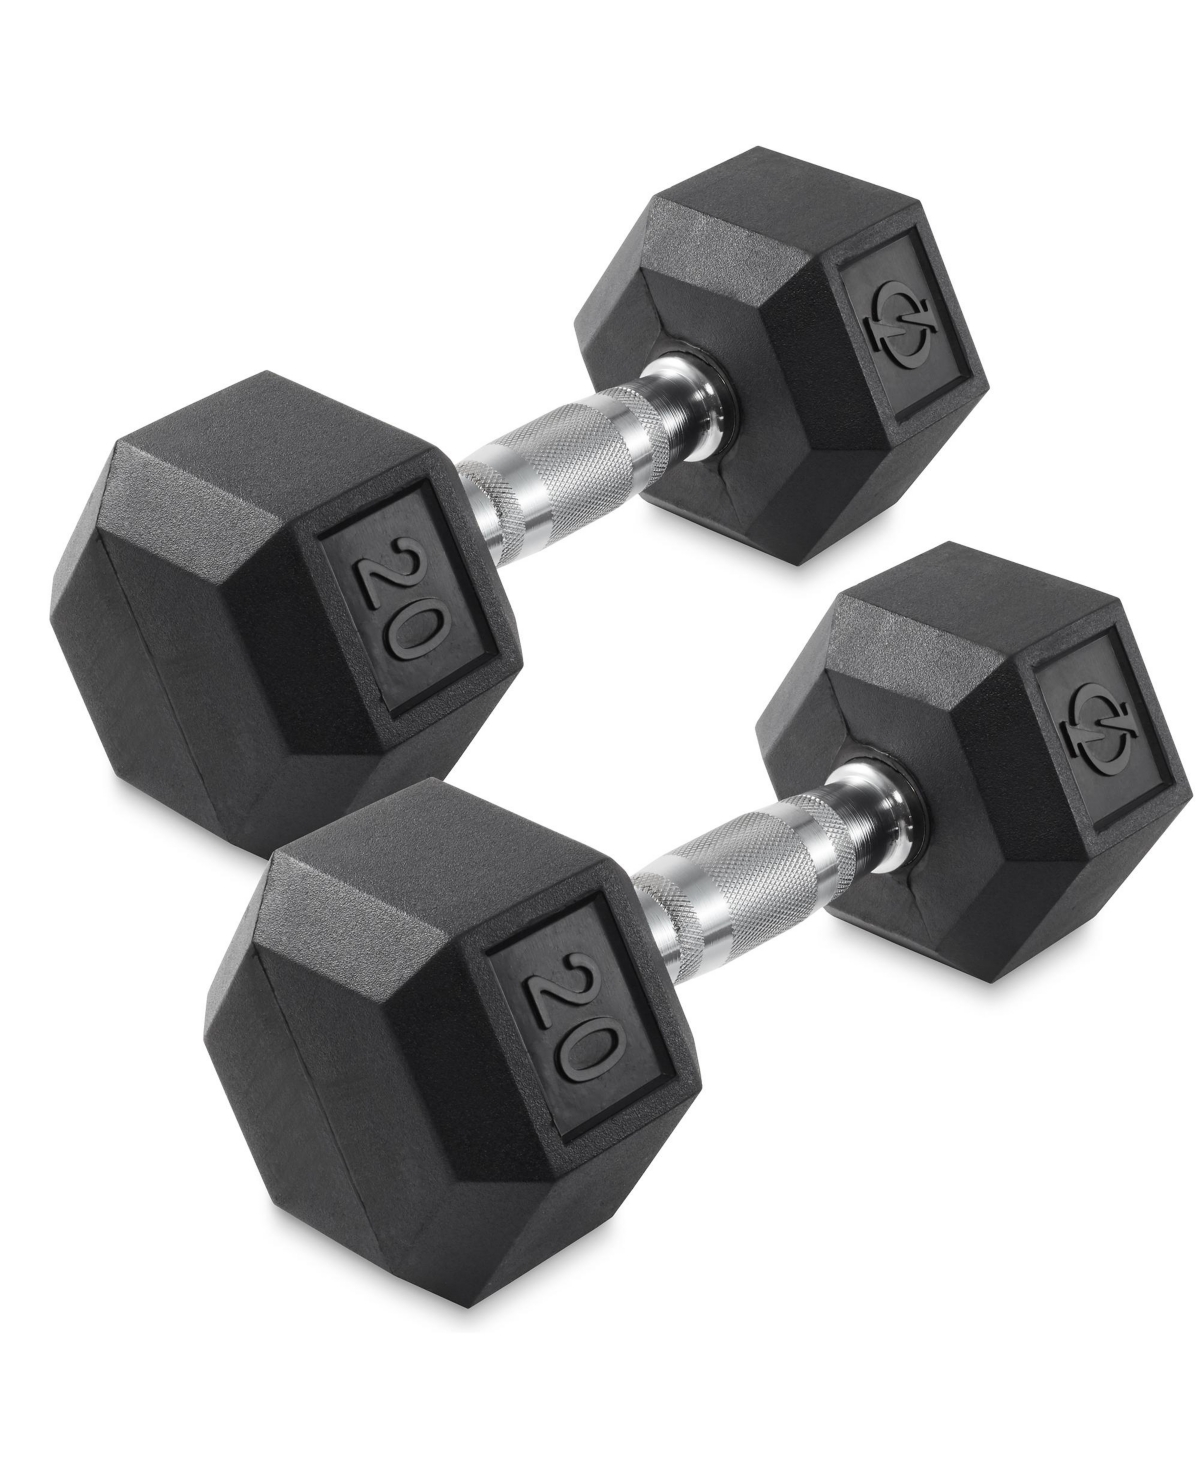 Rubber Coated Hex Dumbbell Hand Weights, 20 lb Pair - Black